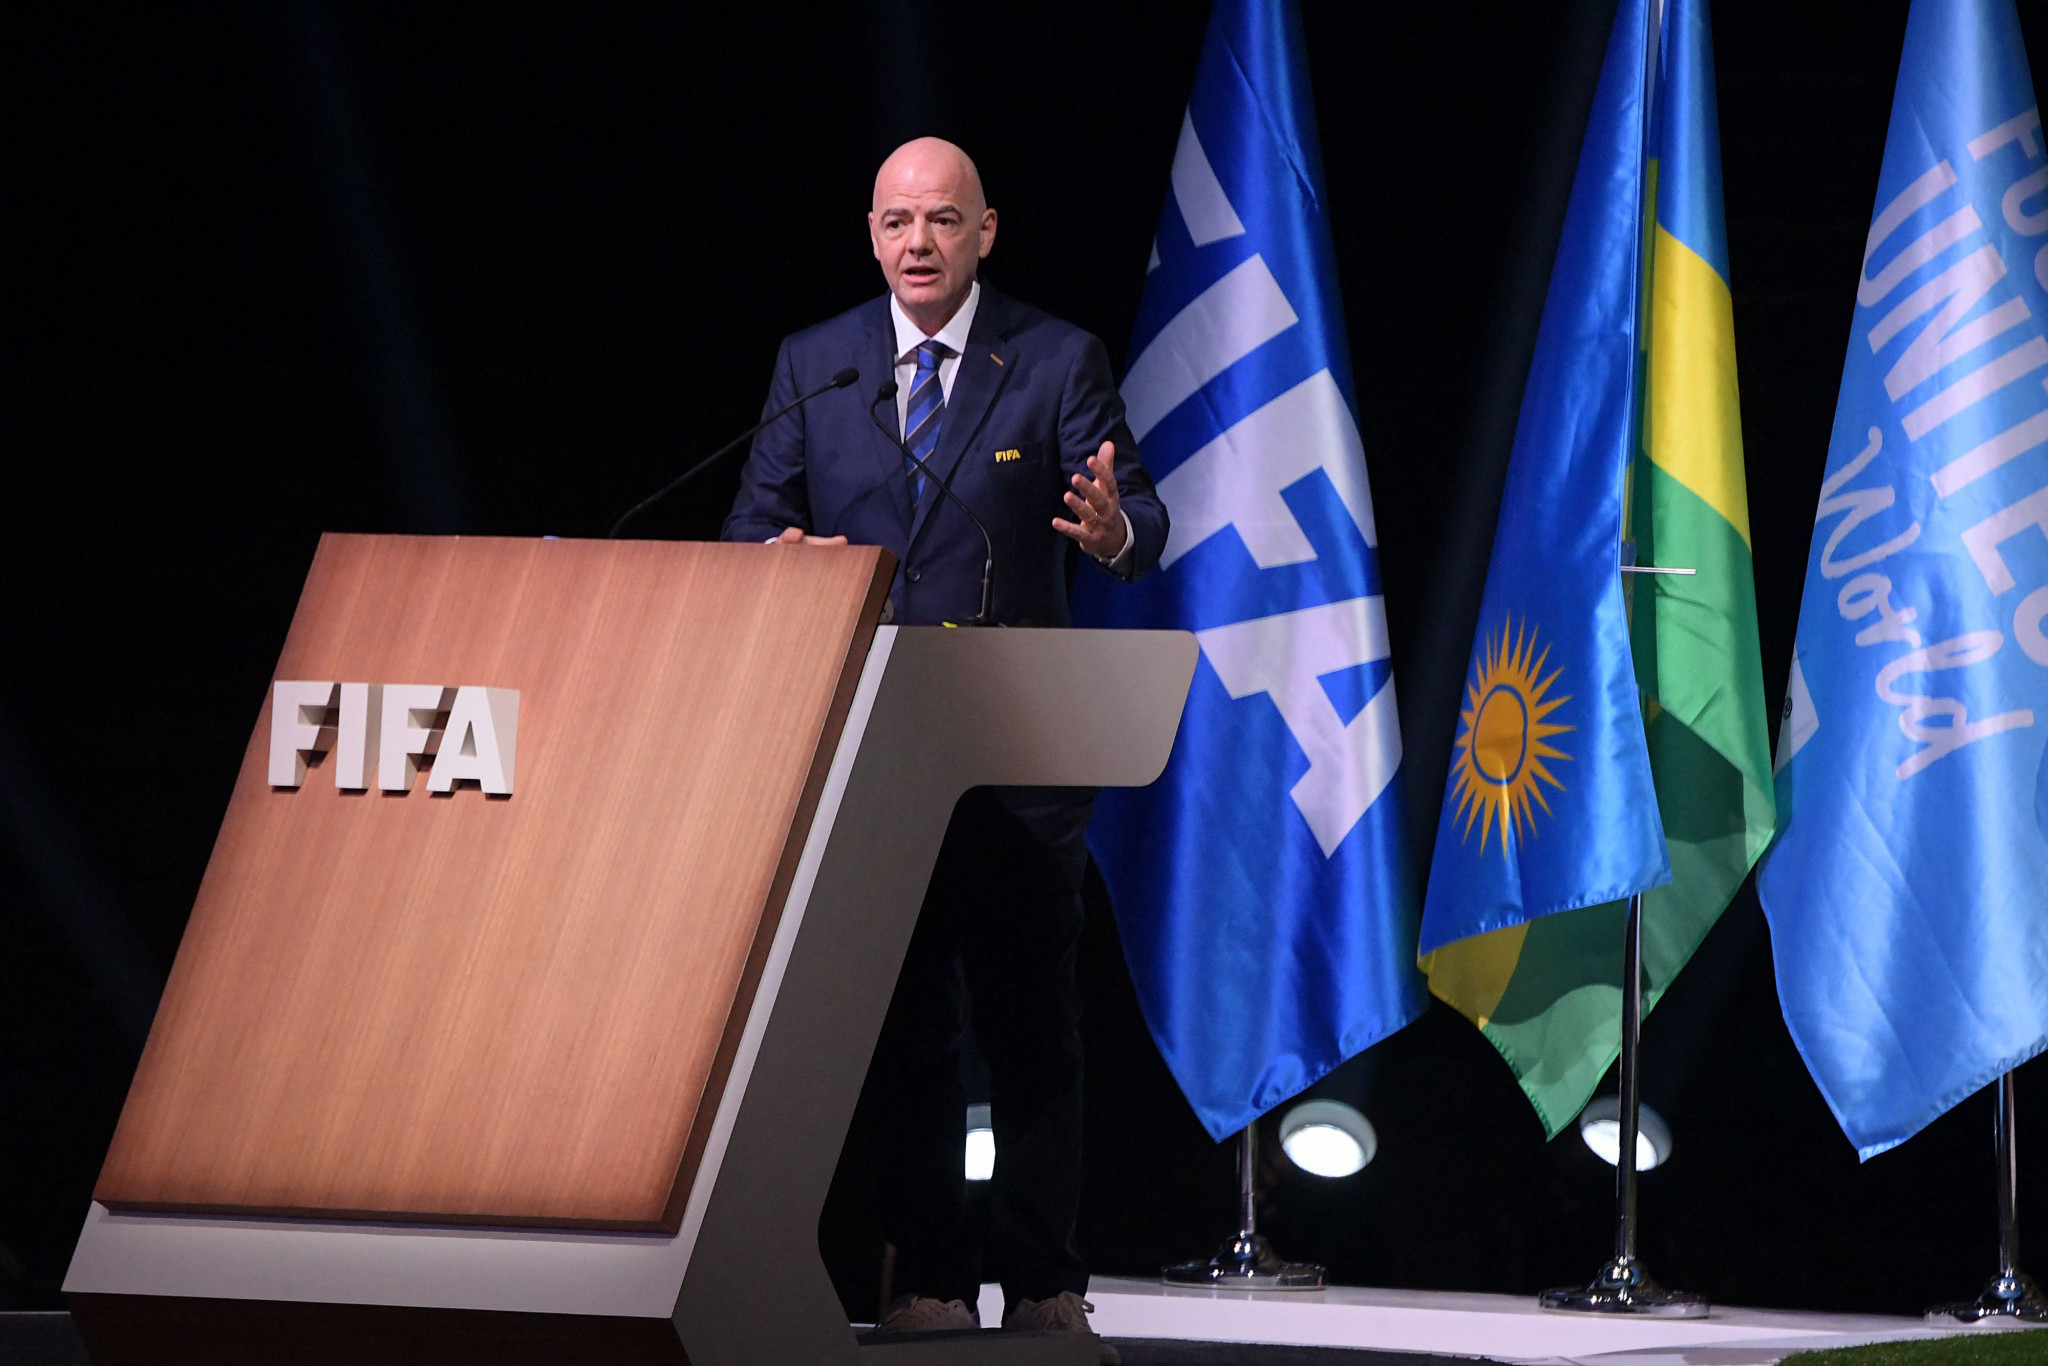 Gianni Infantino has been FIFA President since 2016 ©Getty Images